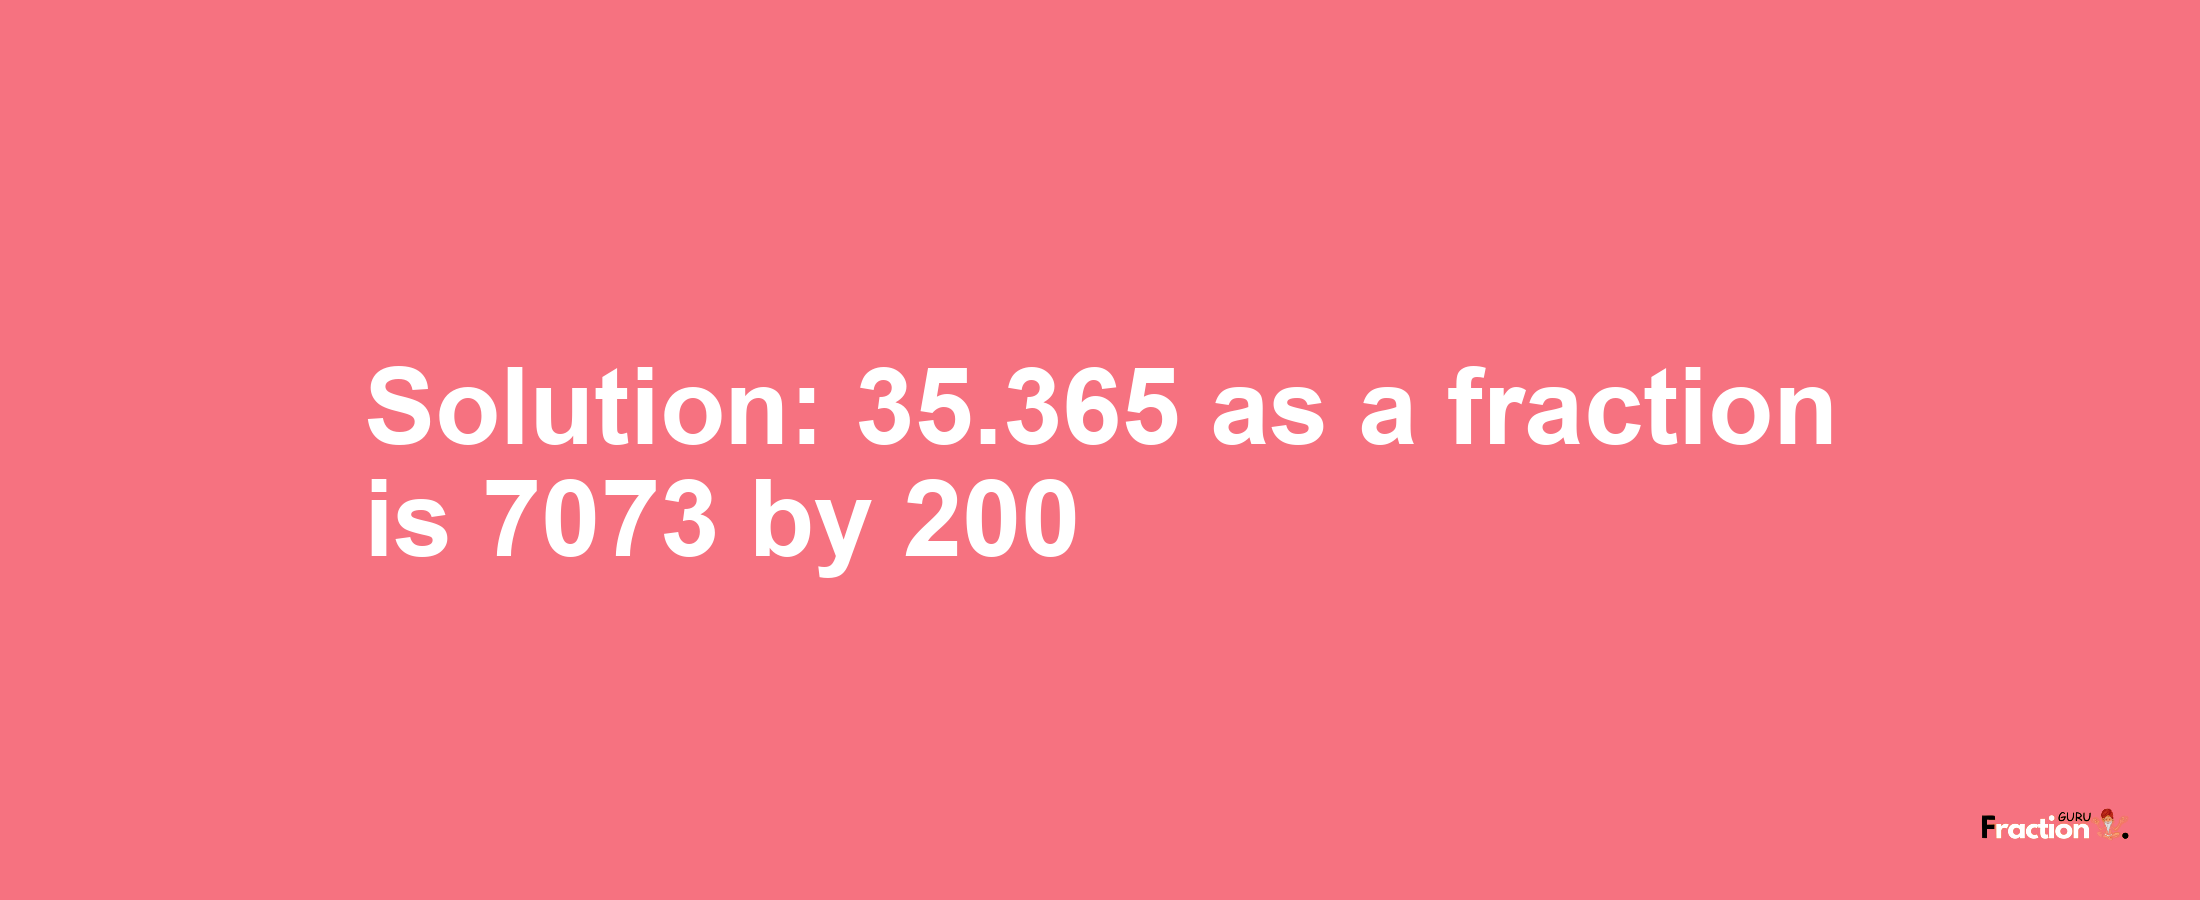 Solution:35.365 as a fraction is 7073/200